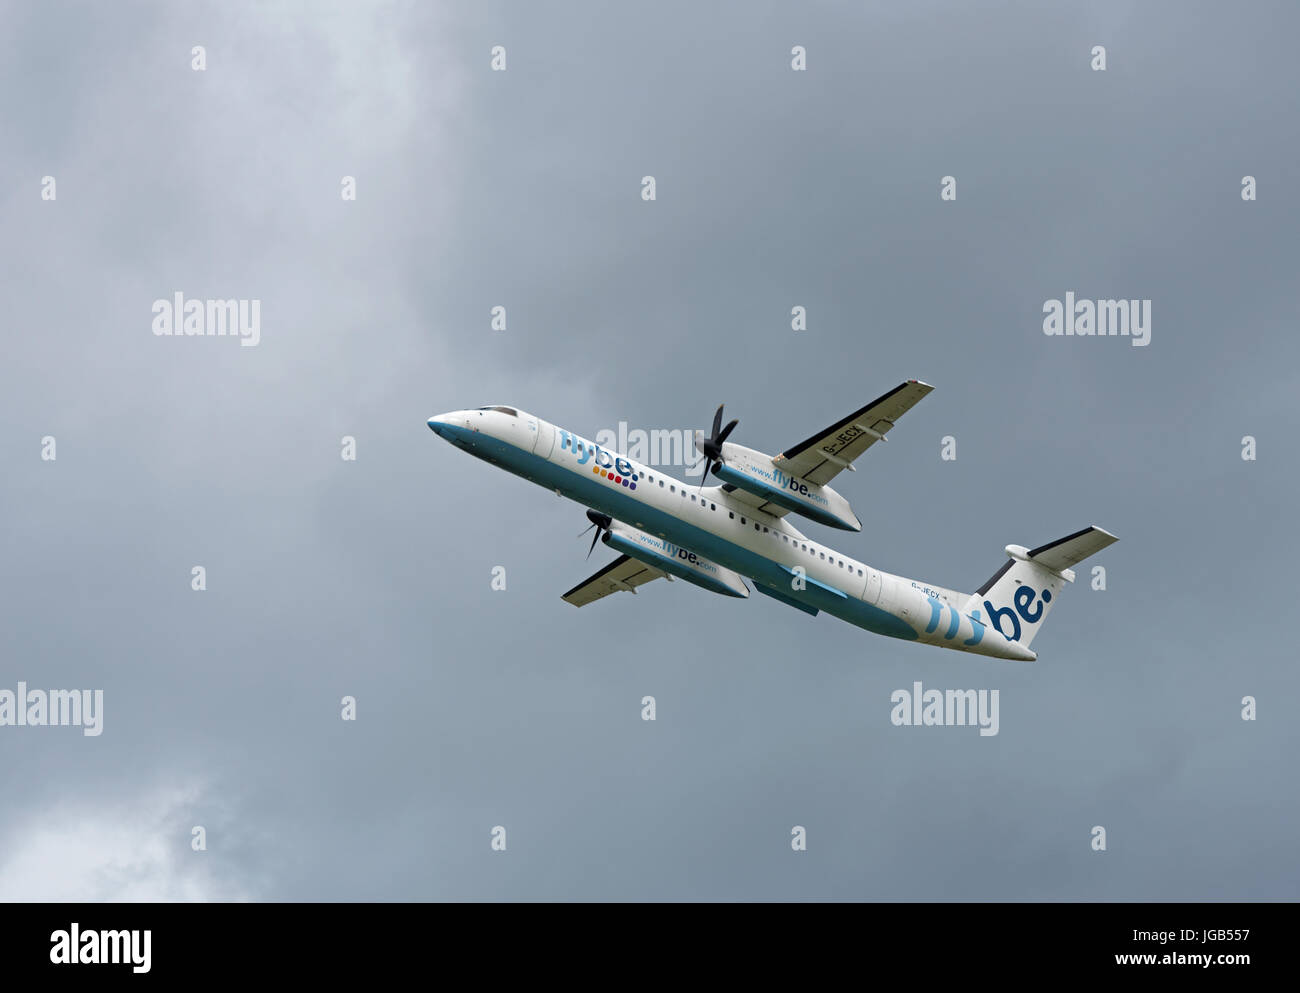 Flybe Dash 8-402 flight leaving Inverness Scotland for Manchester England UK. Stock Photo